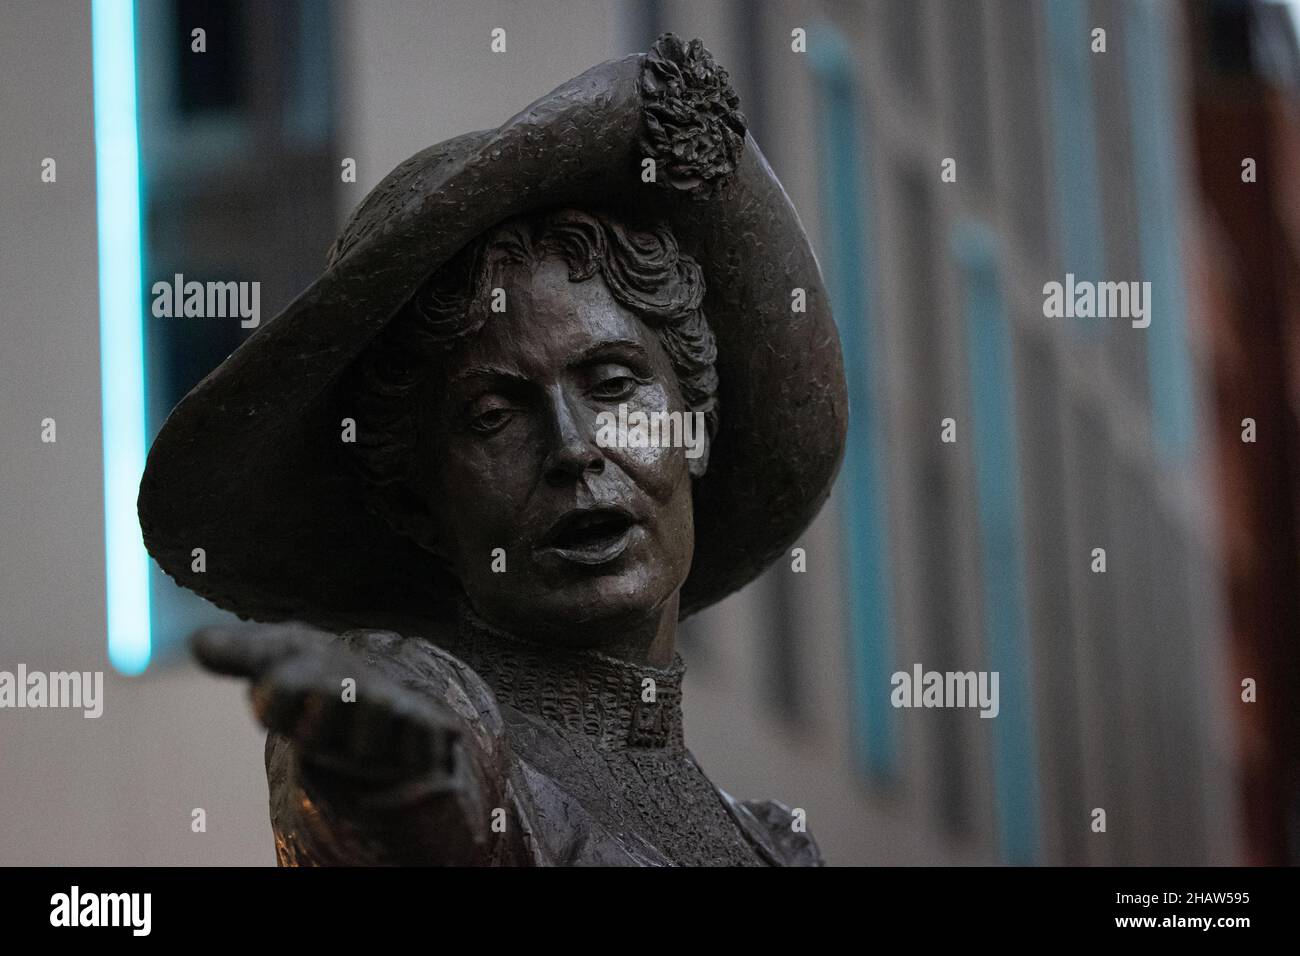 Emmeline Pankhurst statue Manchester 2021. Statue in St Peters Square. Manchester UK. The bronze statue of Emmeline Pankhurst in Manchester celebrates the British political activist and leader of the suffragette movement in the U.K Stock Photo